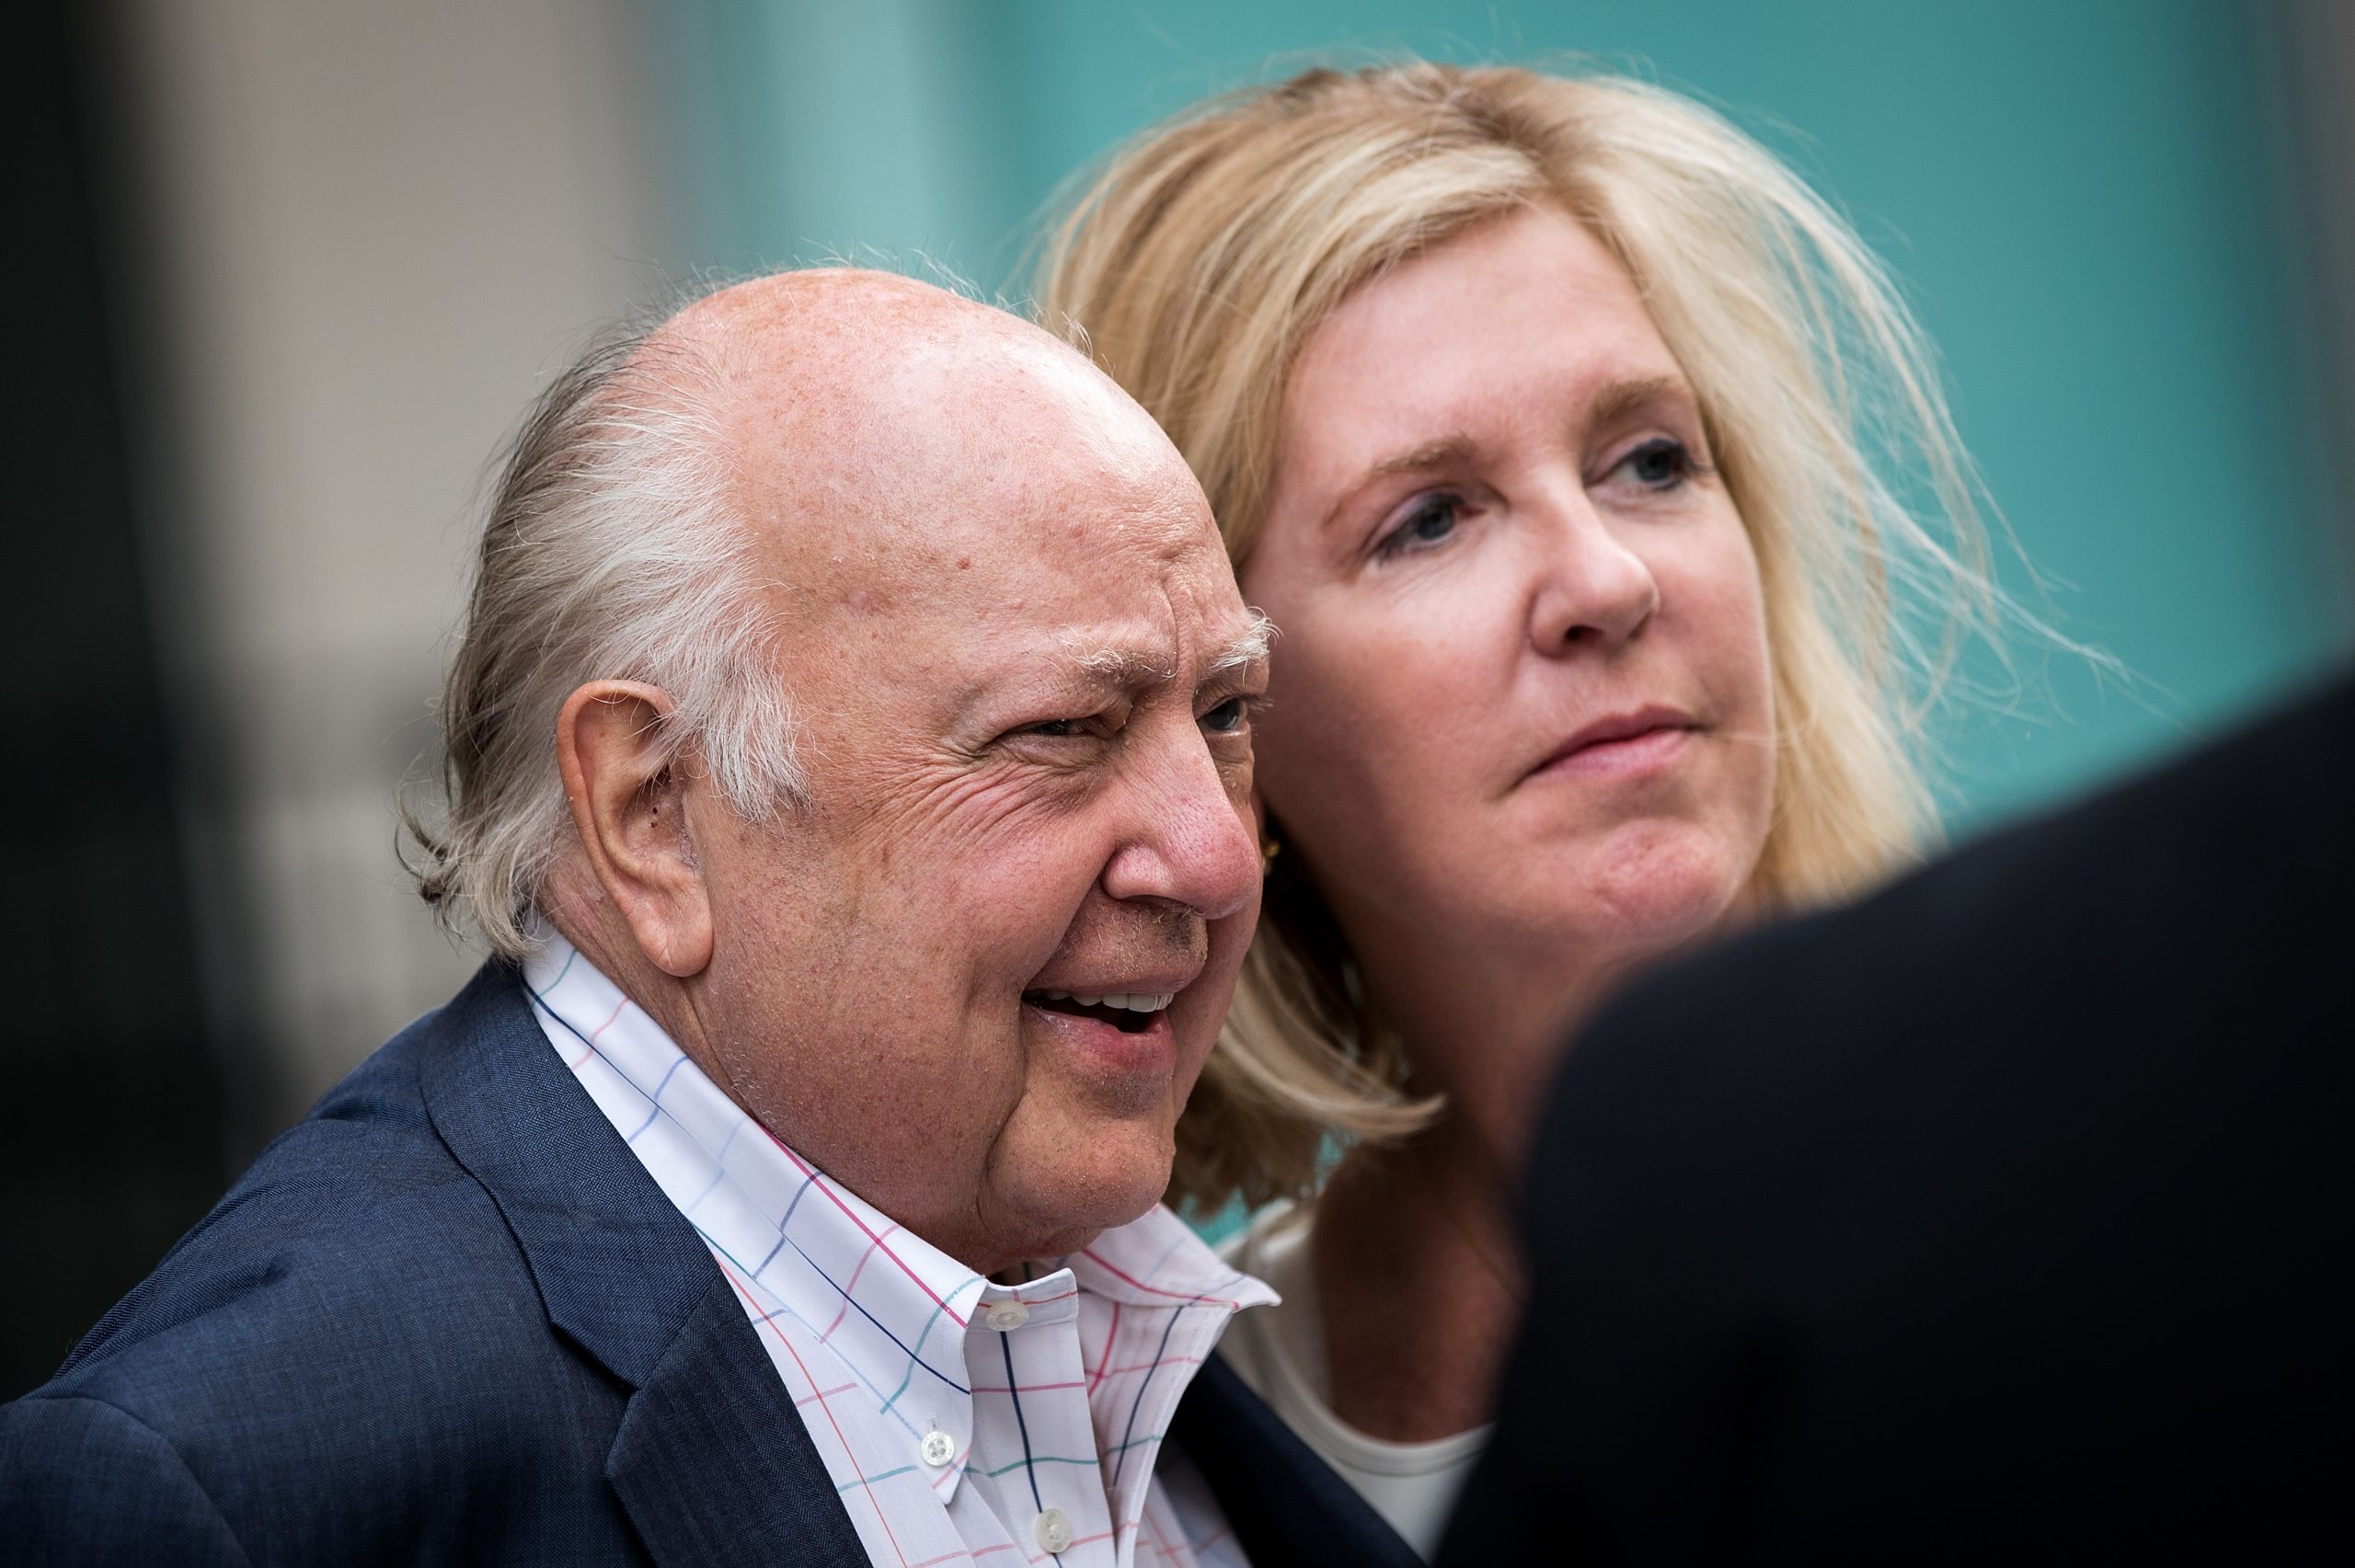 Roger Ailes net worth